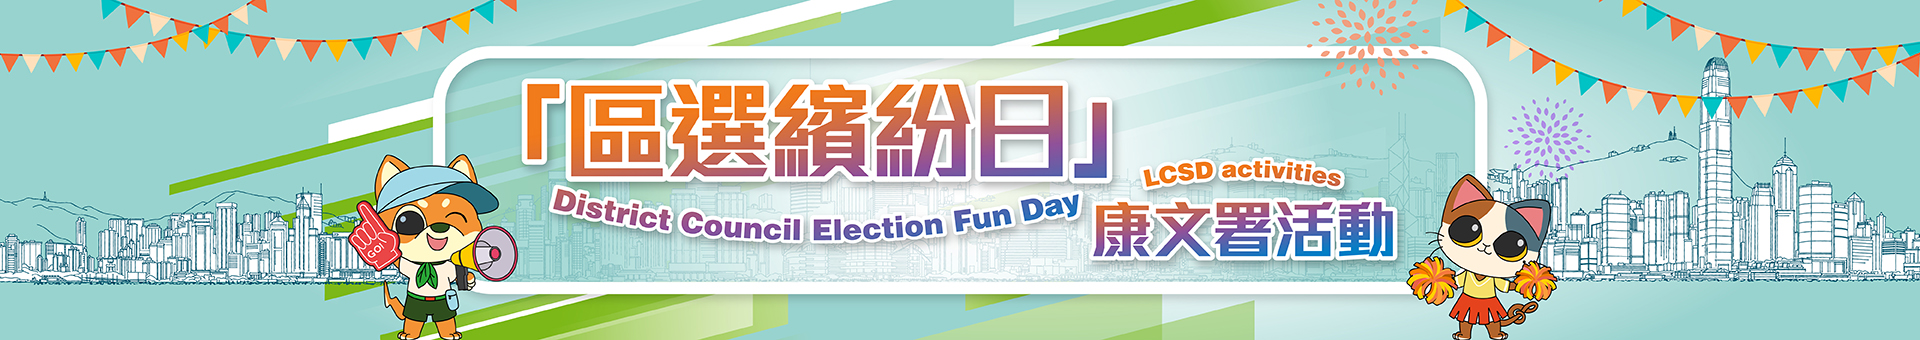 District Council Election Fun Day - LCSD activities 